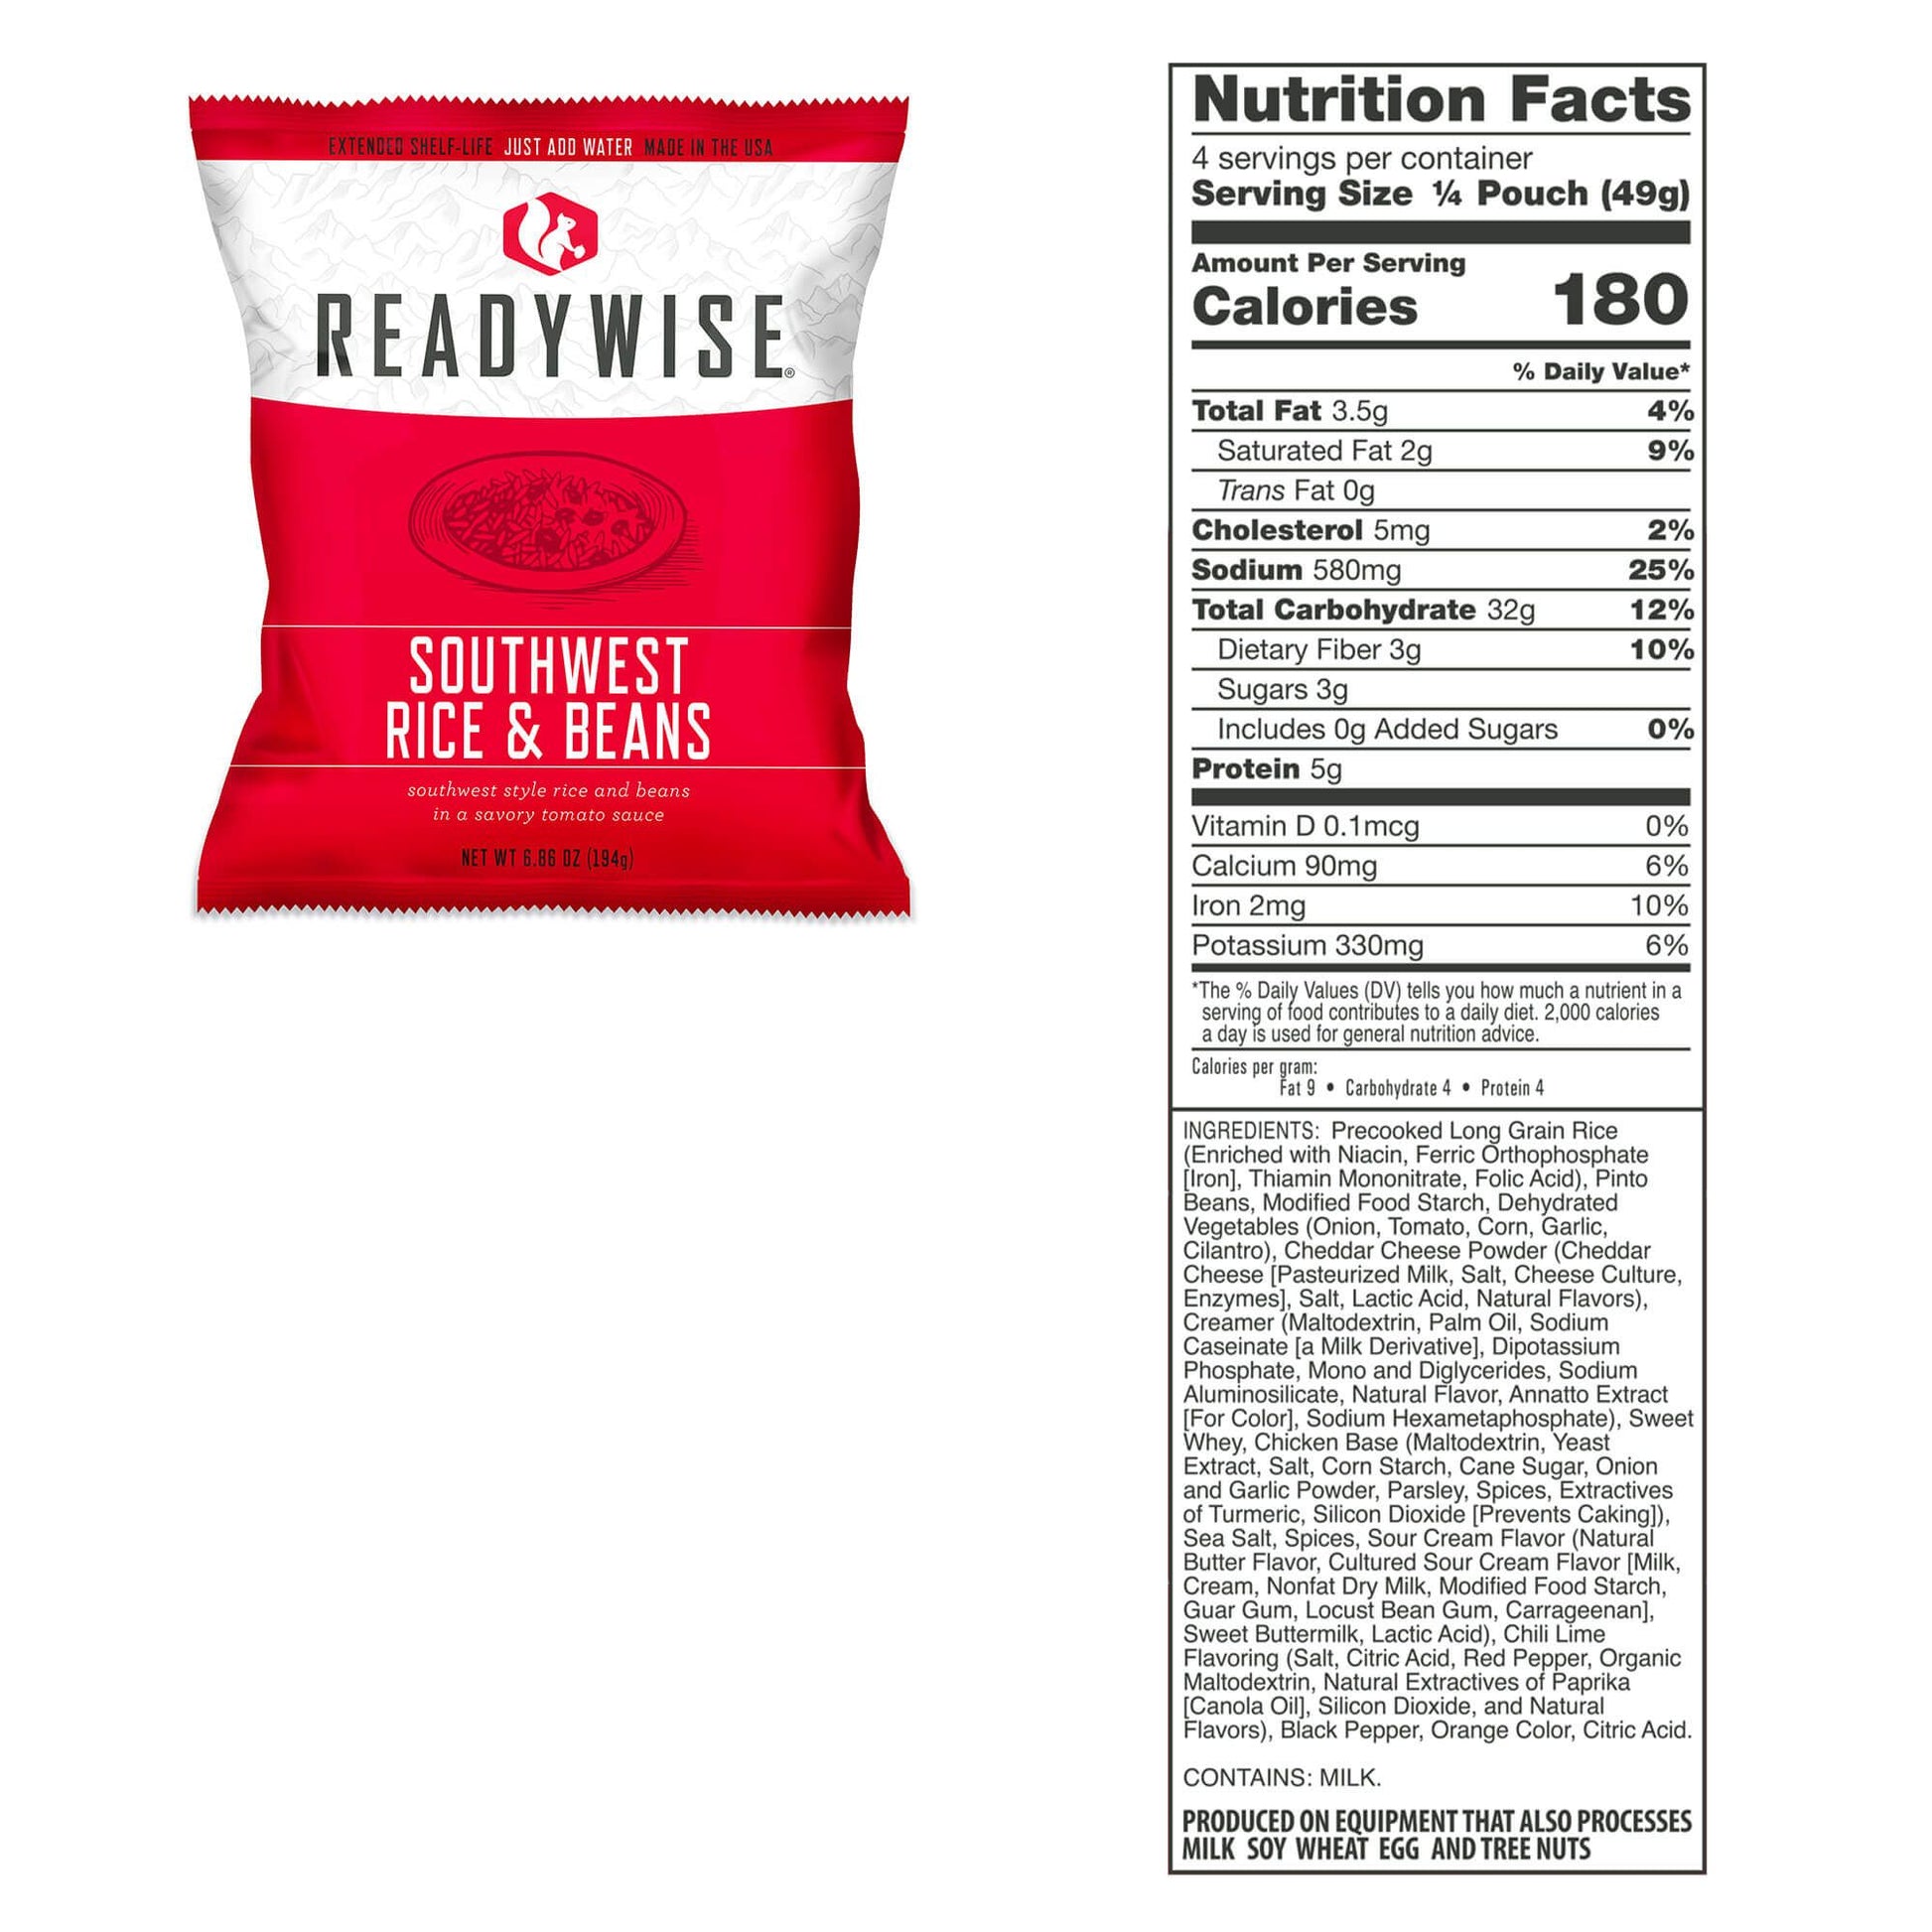 Southwest Rice & Beans packet with nutritional information